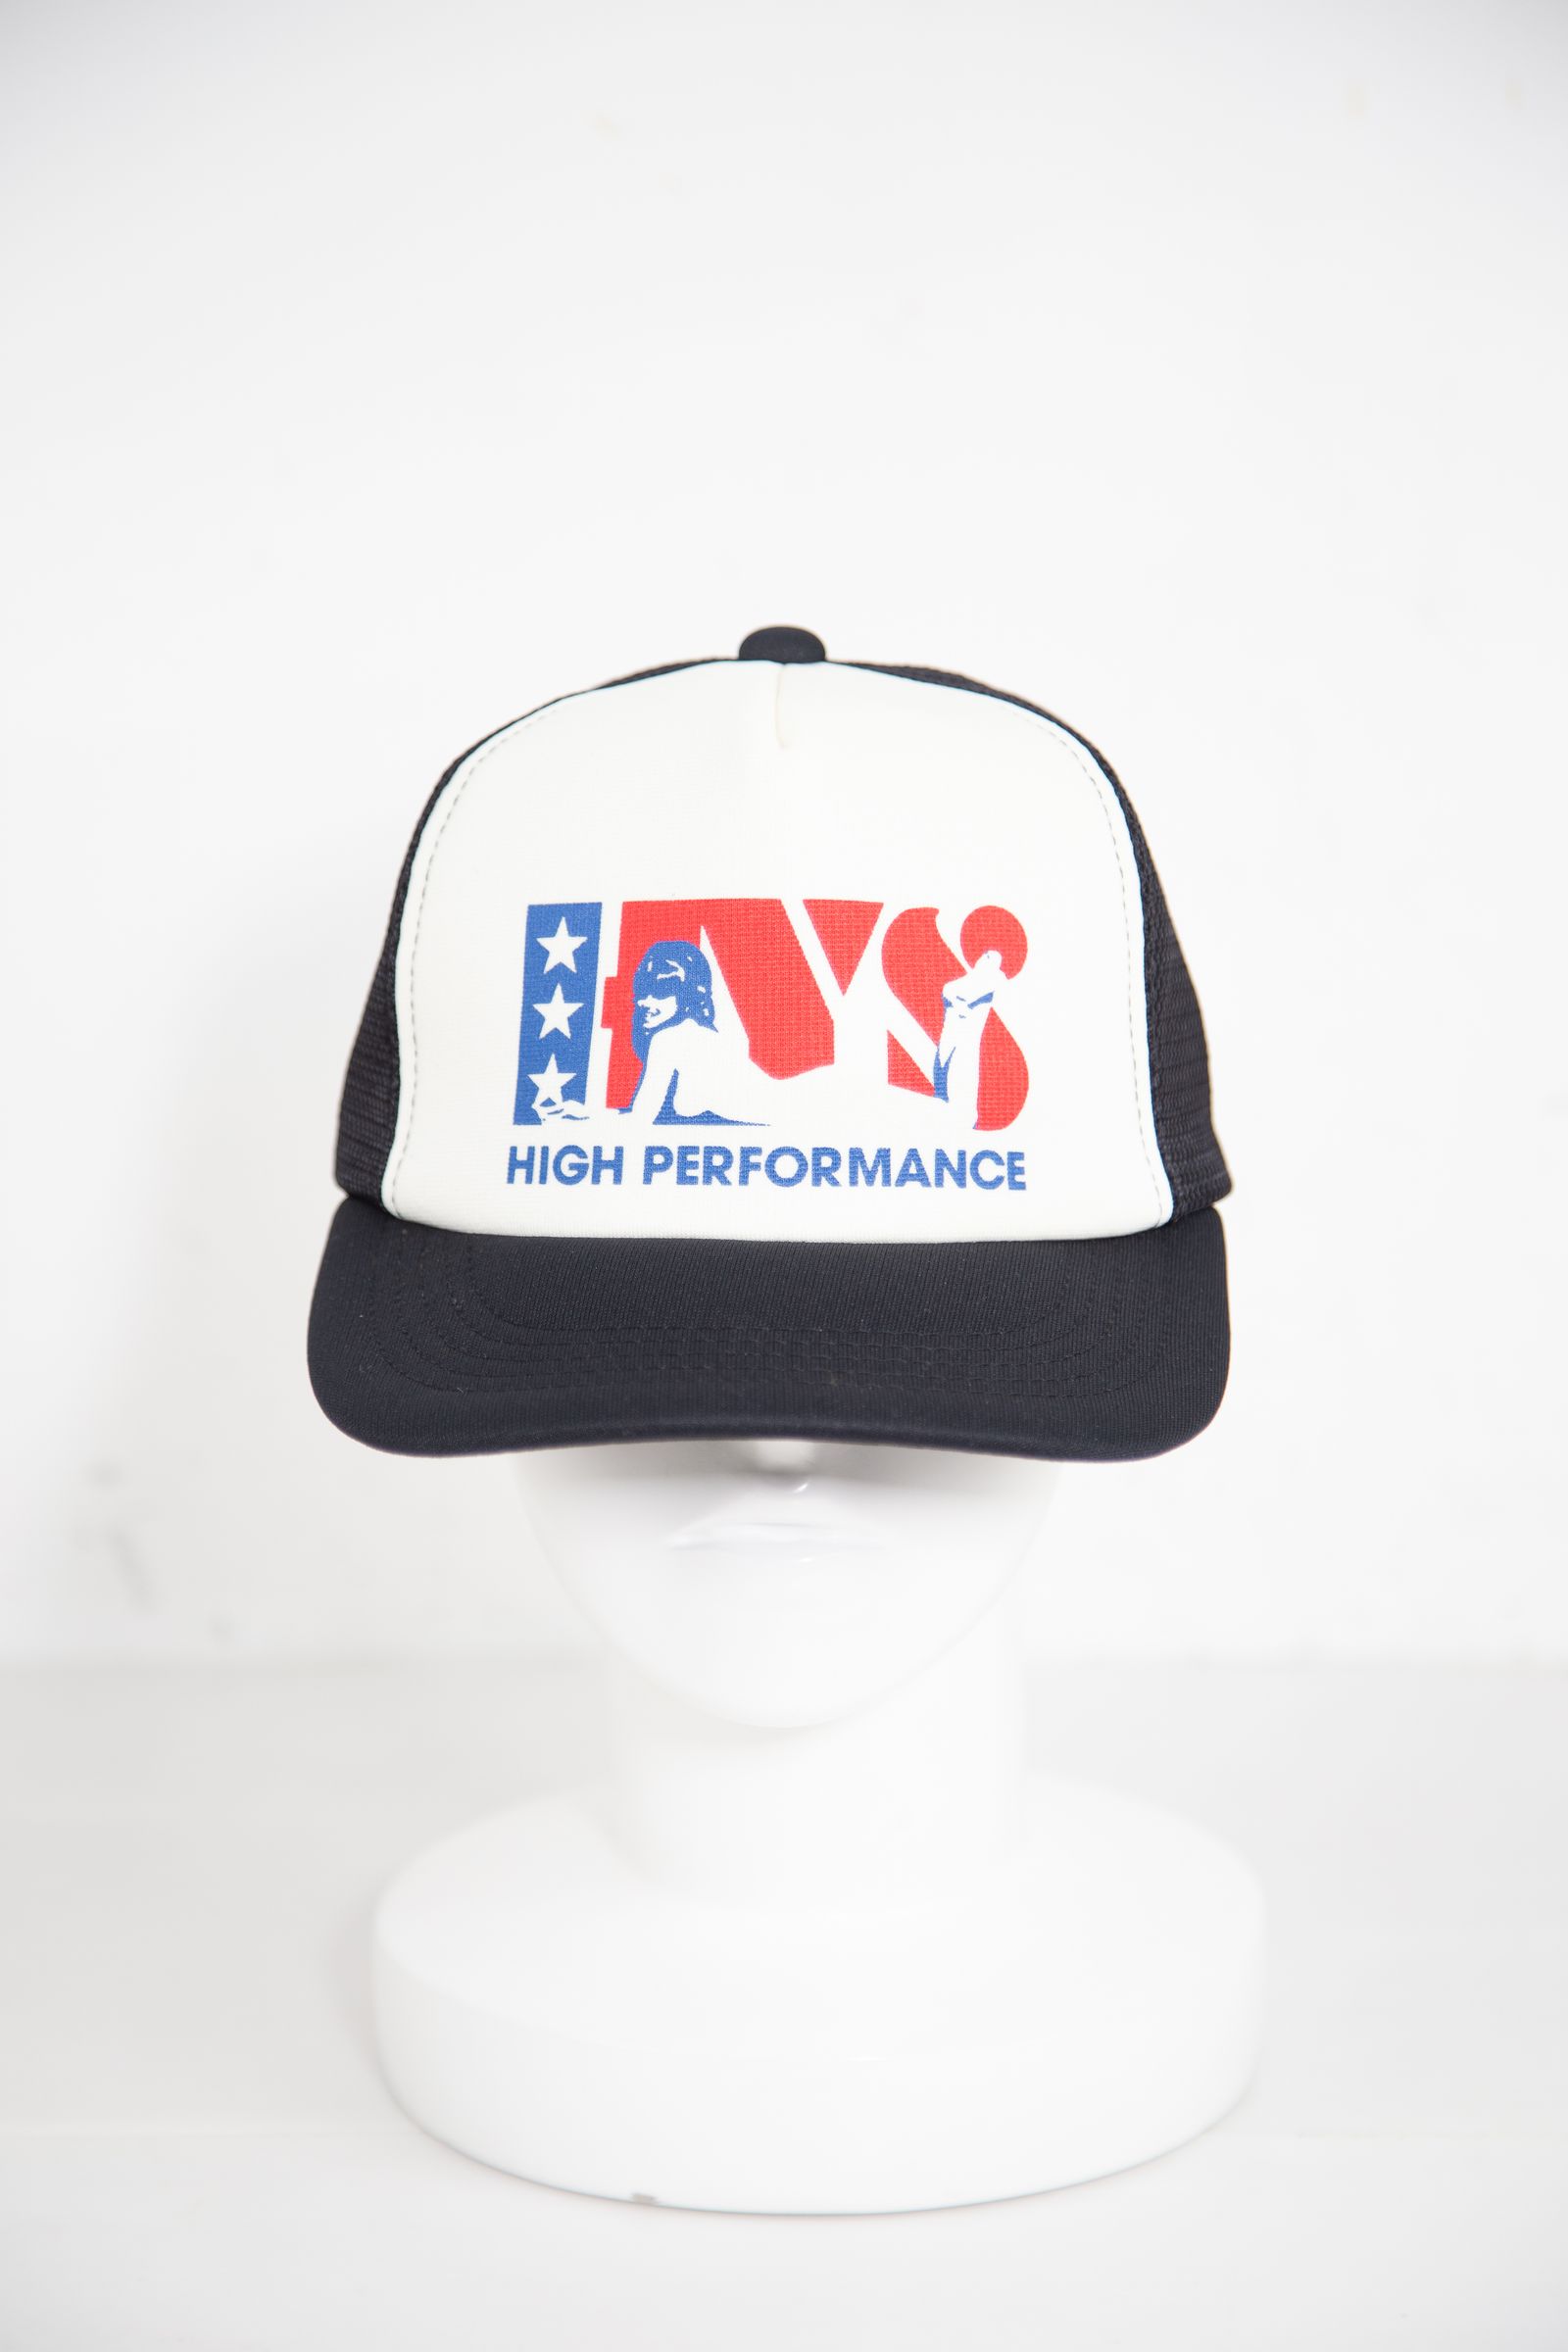 HYSTERIC GLAMOUR - HIGH PERFORMANCE メッシュキャップ 